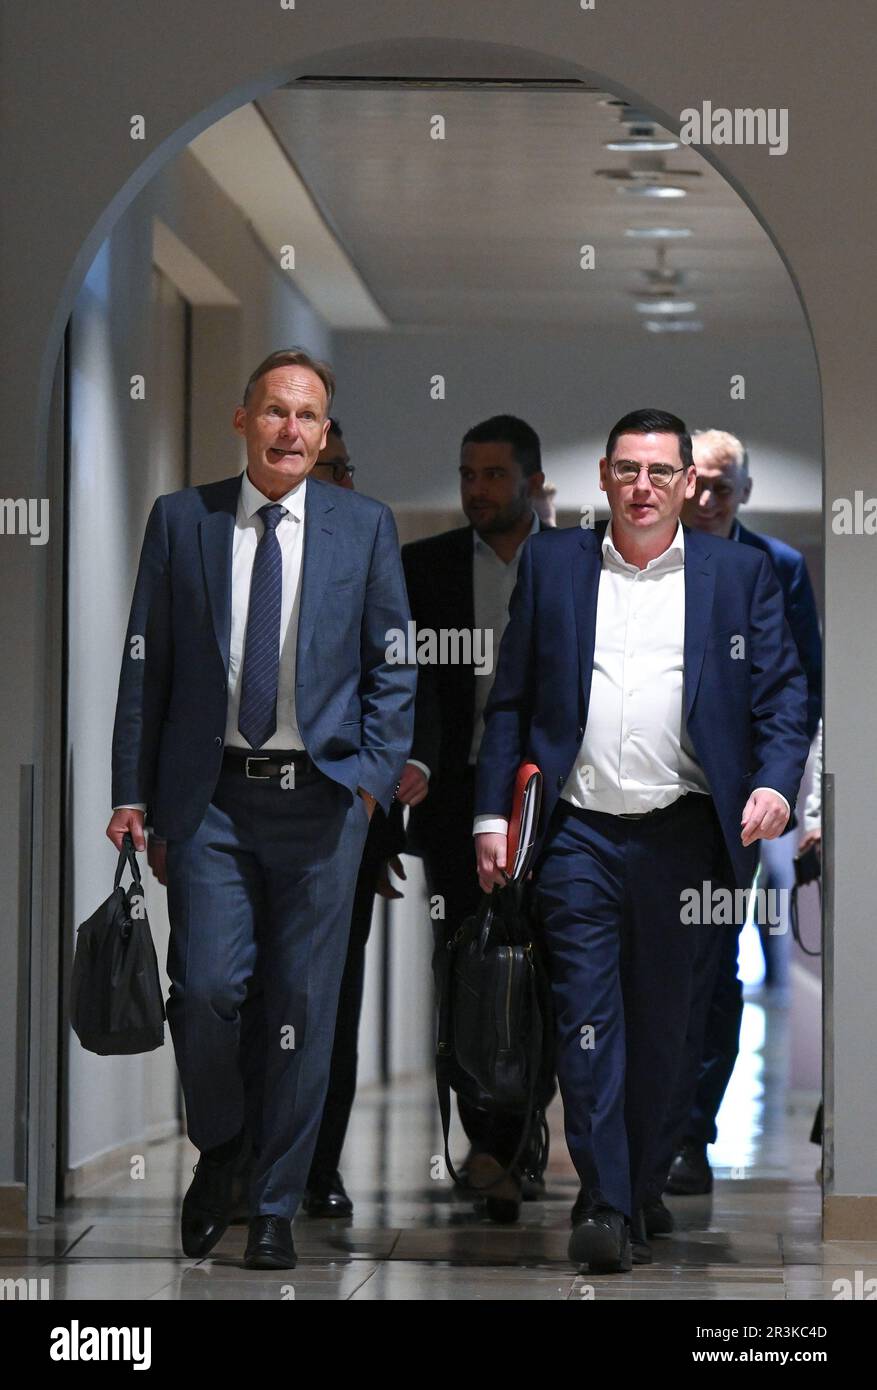 24 May 2023, Hesse, Frankfurt/Main: Hans-Joachim Watzke (l), Managing Director of Borussia Dortmund and Chairman of the DFL Supervisory Board, and Oliver Leki (2nd from right), CFO of SC Freiburg and one of the two Managing Directors of DFL GmbH, are on their way to the DFL General Meeting at Frankfurt Airport. The topic is the possible entry of an investor into the German Soccer League (DFL). Photo: Arne Dedert/dpa - IMPORTANT NOTE: In accordance with the requirements of the DFL Deutsche Fußball Liga and the DFB Deutscher Fußball-Bund, it is prohibited to use or have used photographs taken in Stock Photo